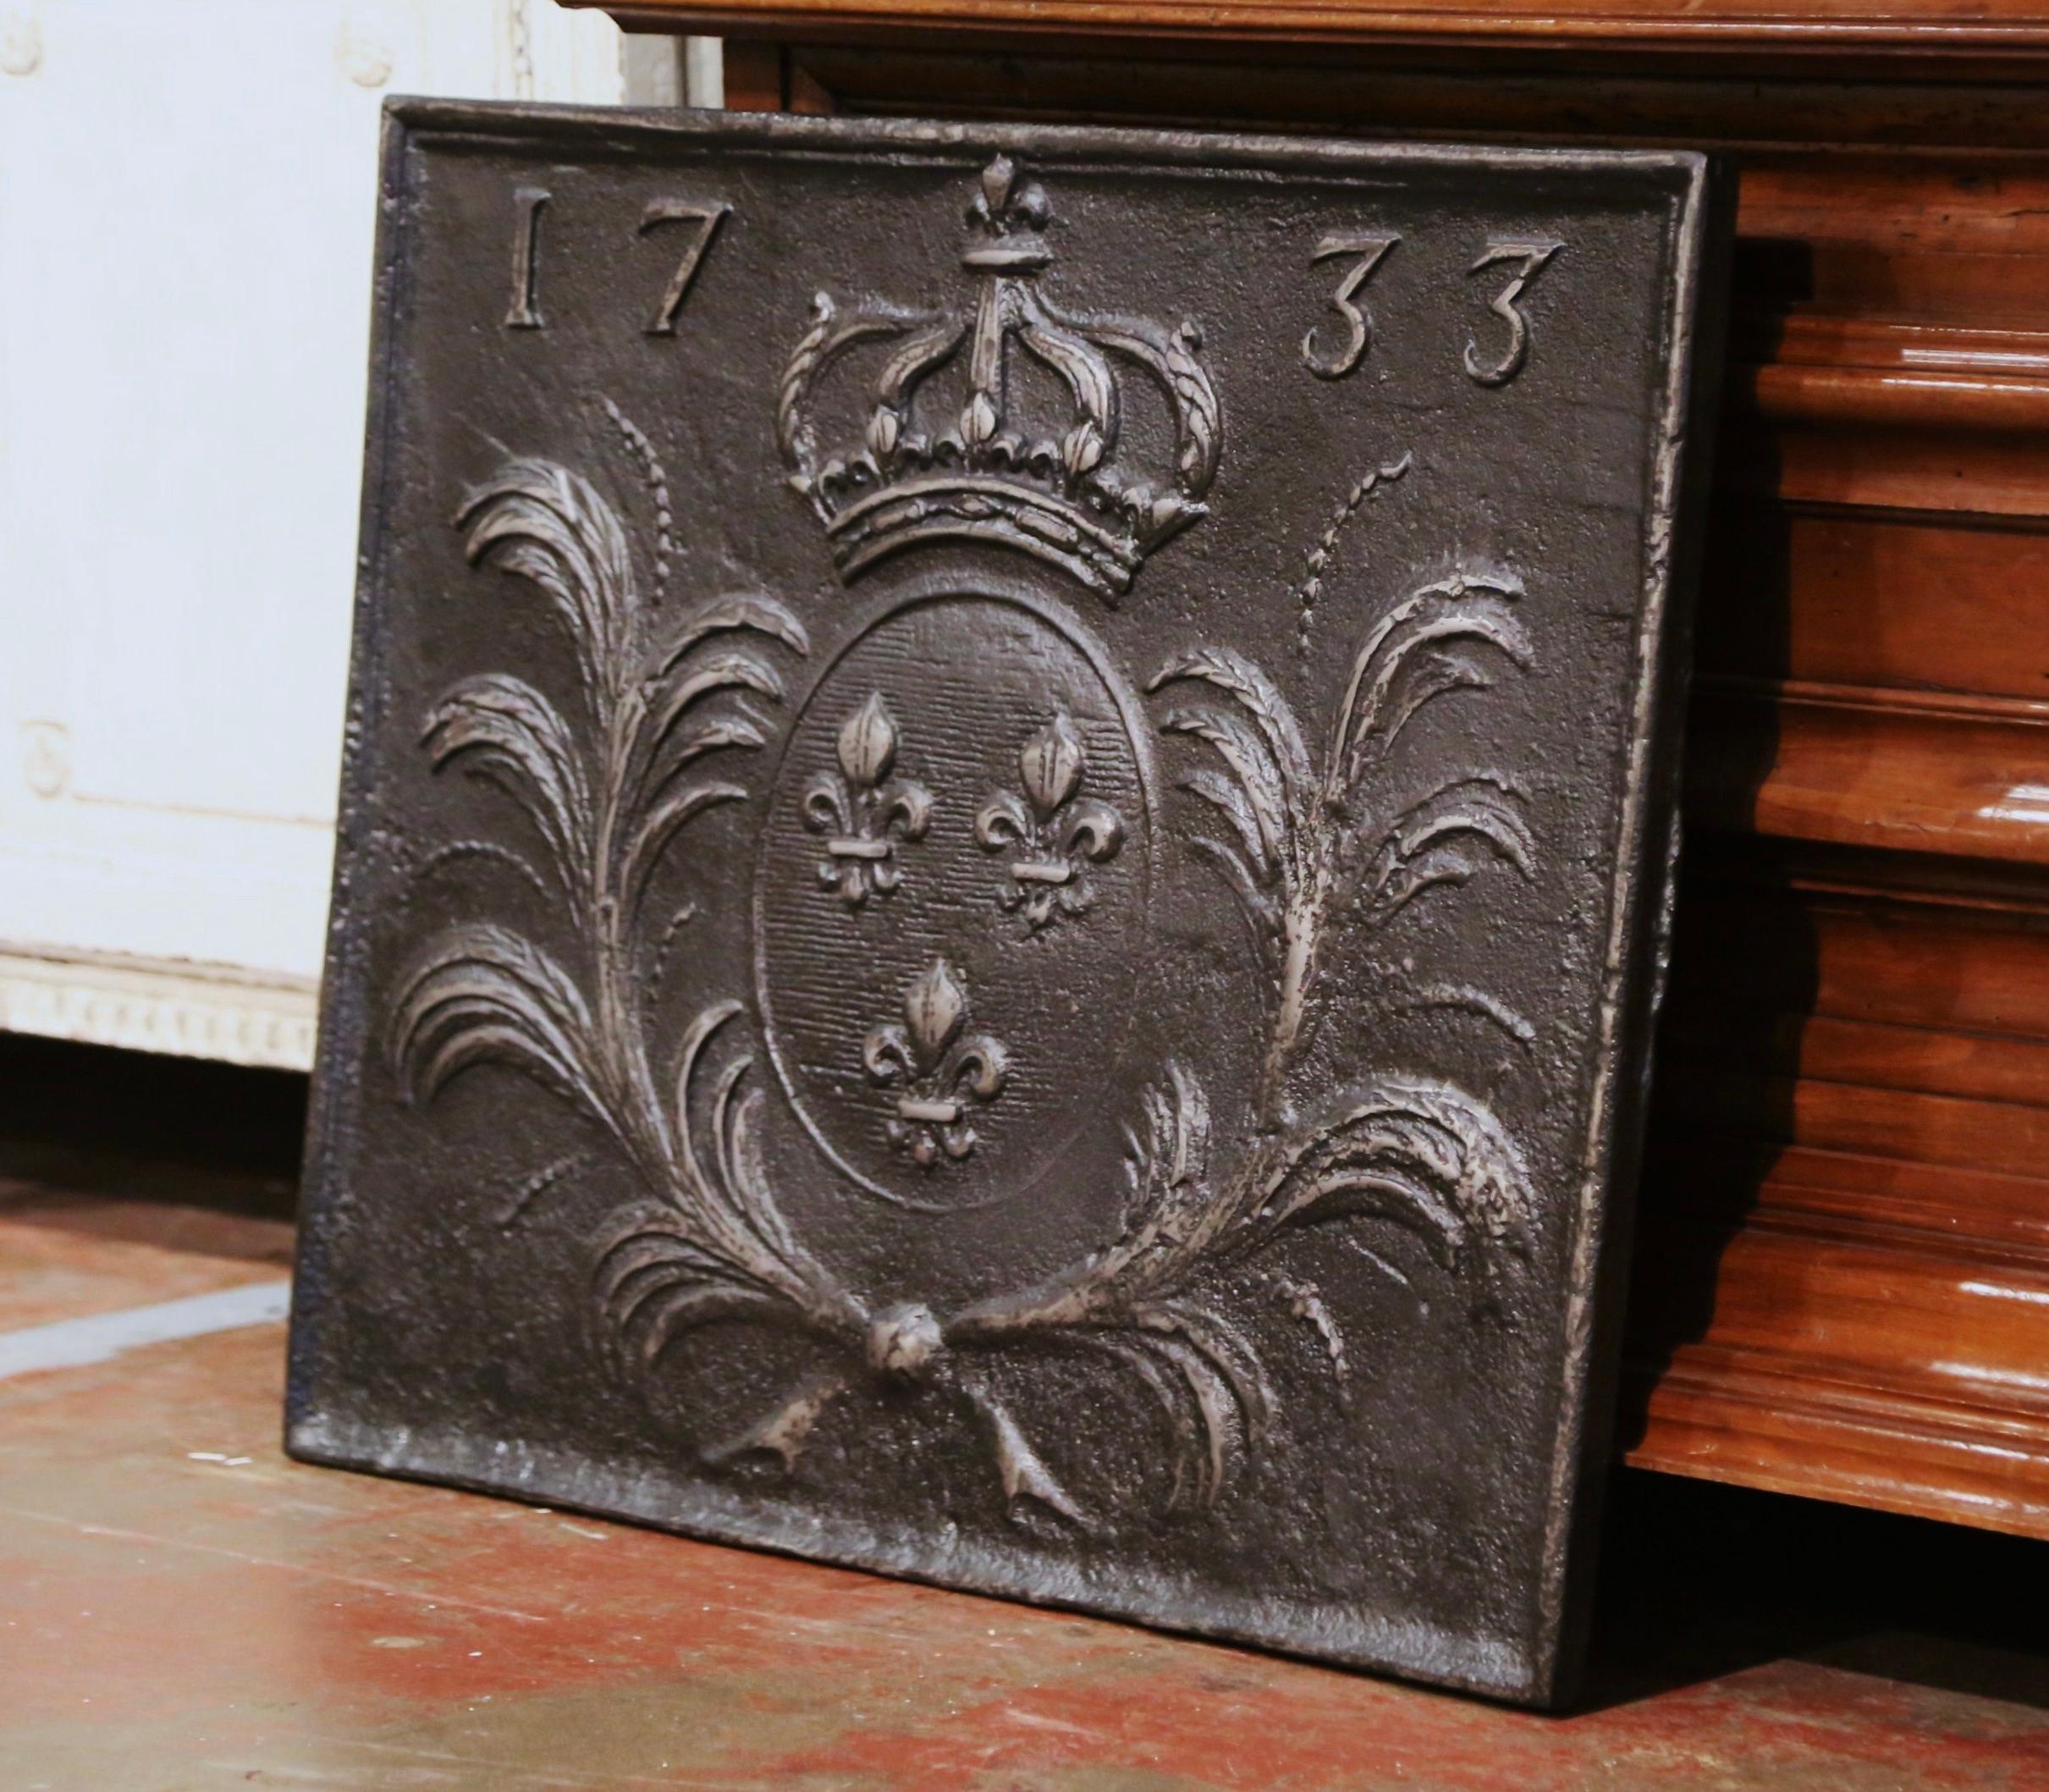 Decorate your fireplace with this elegant antique fire back. Crafted circa 1770 and almost square in shape, the French ornate fireplace essential with a date of 1733 at the pediment, features a crest of the kingdom of Louis XIV with three